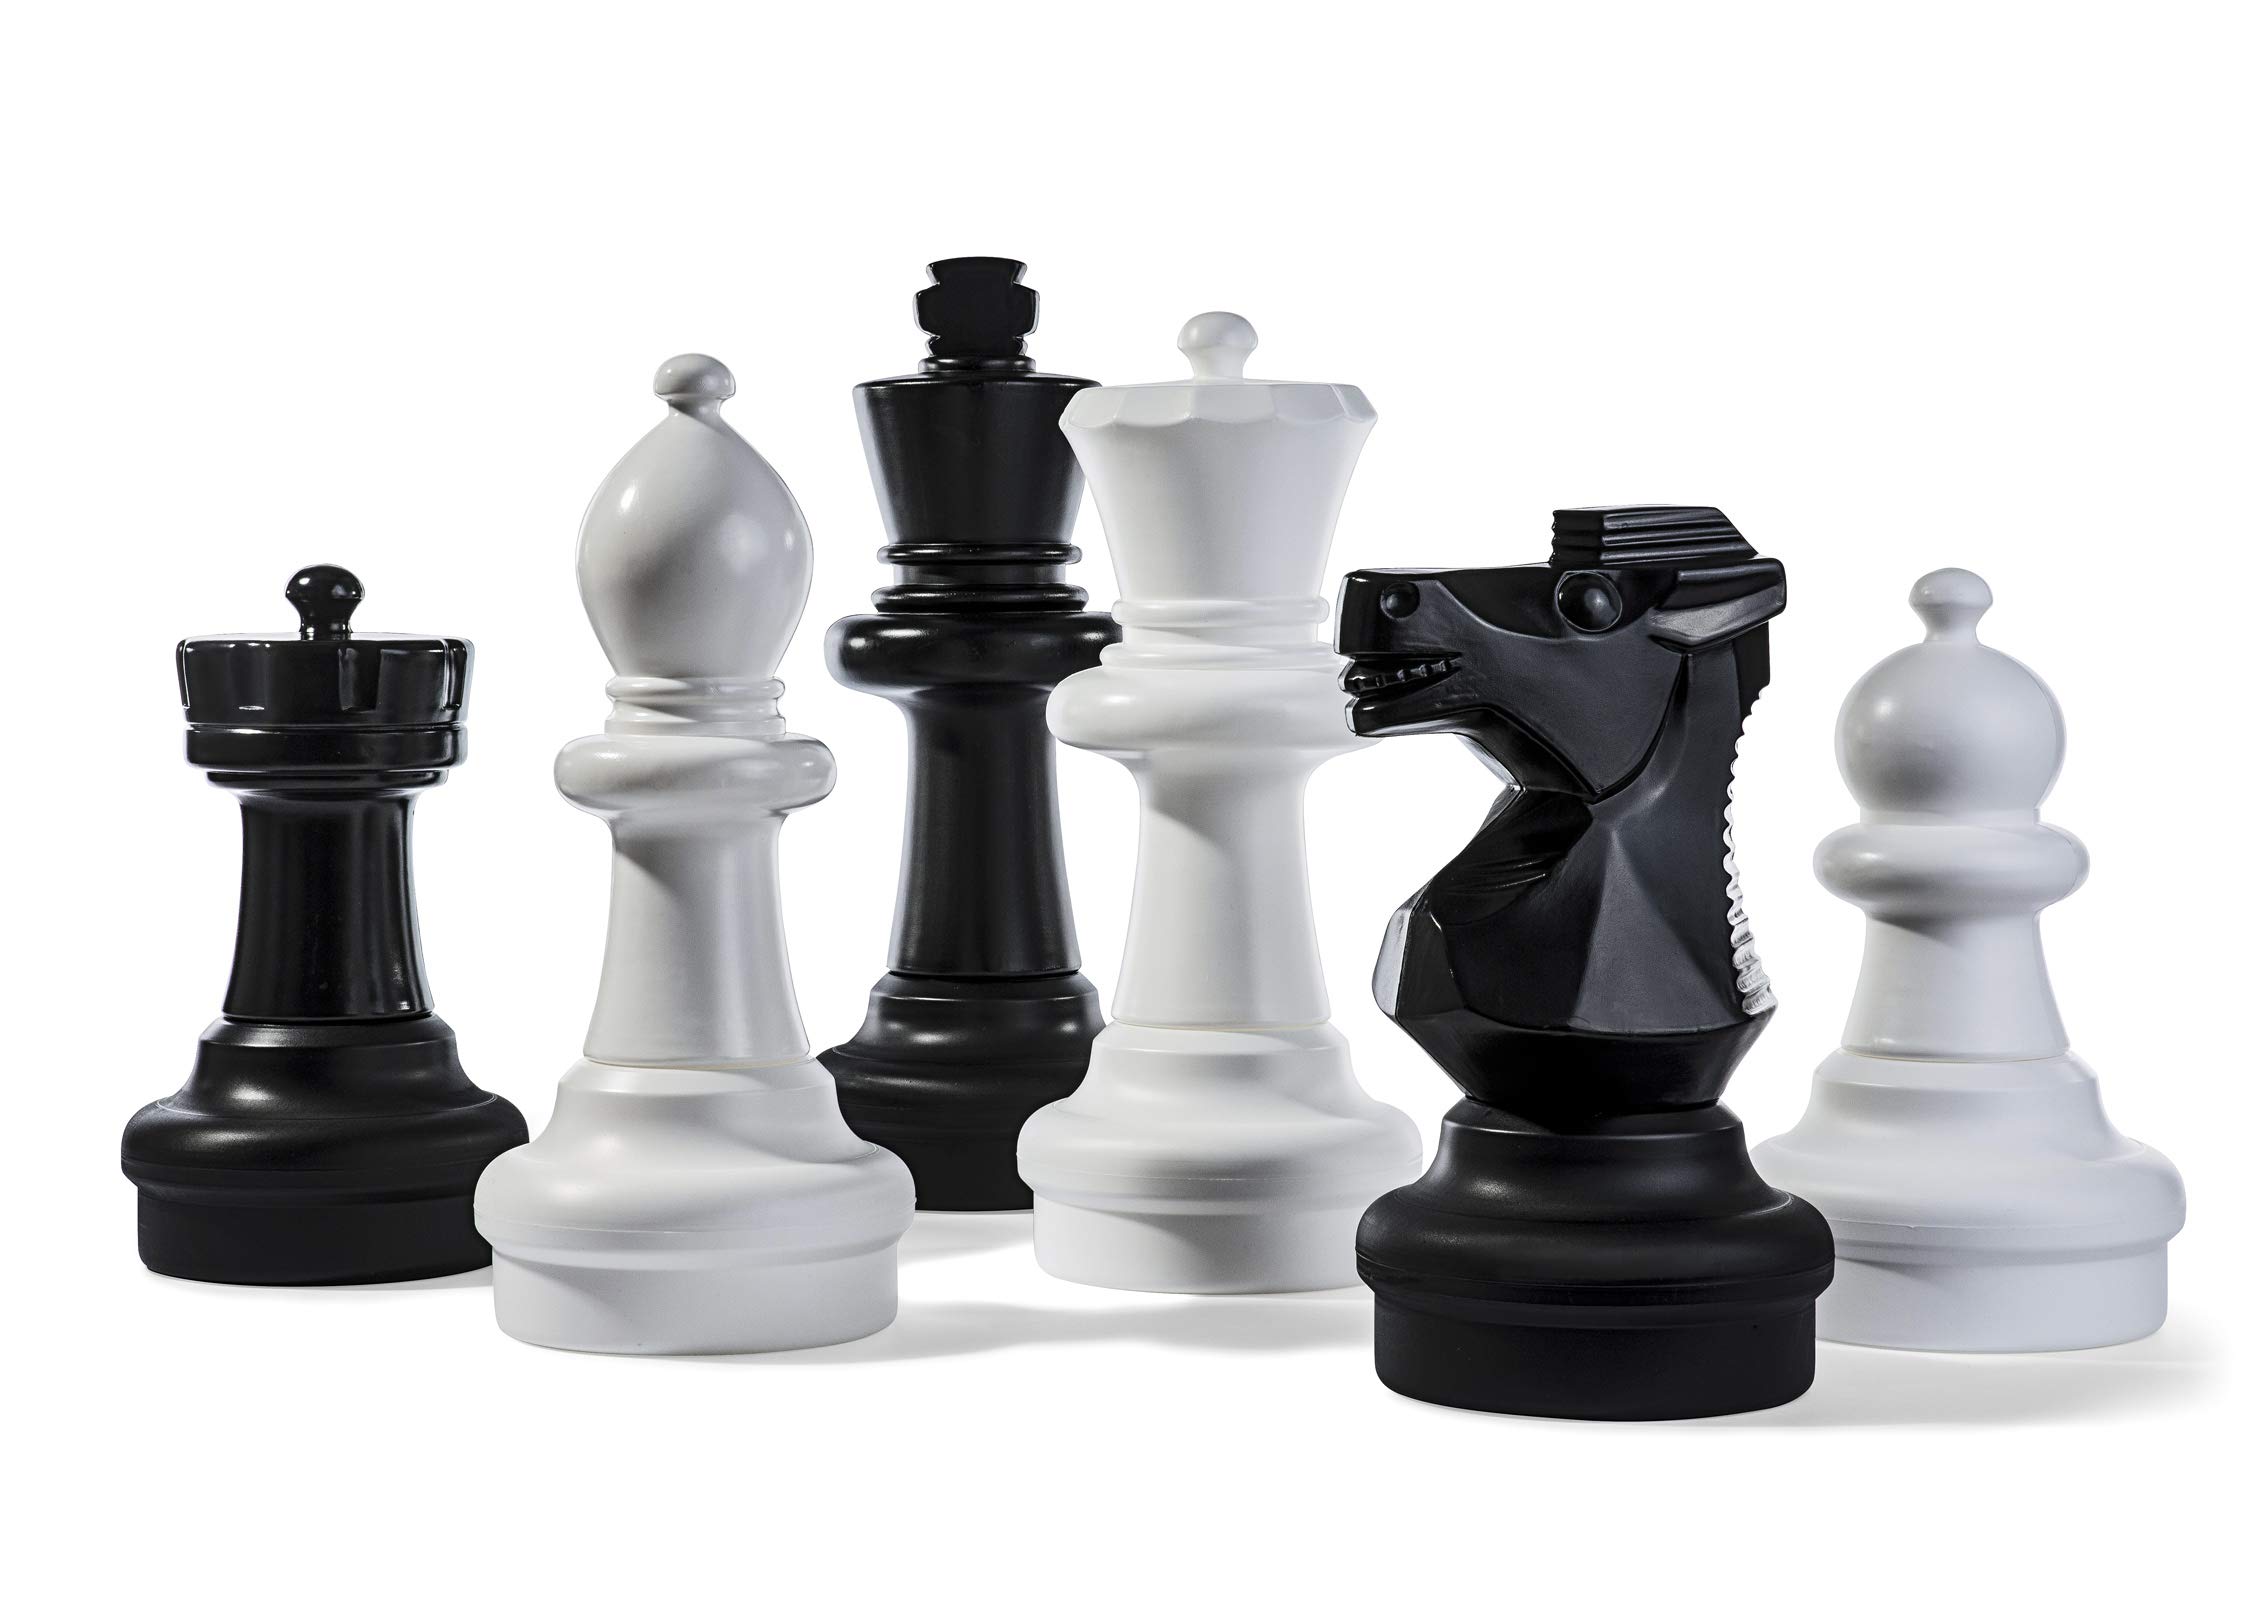 Kettler Giant Chess Pieces Complete Set with 25 Inches Tall King - White and Black